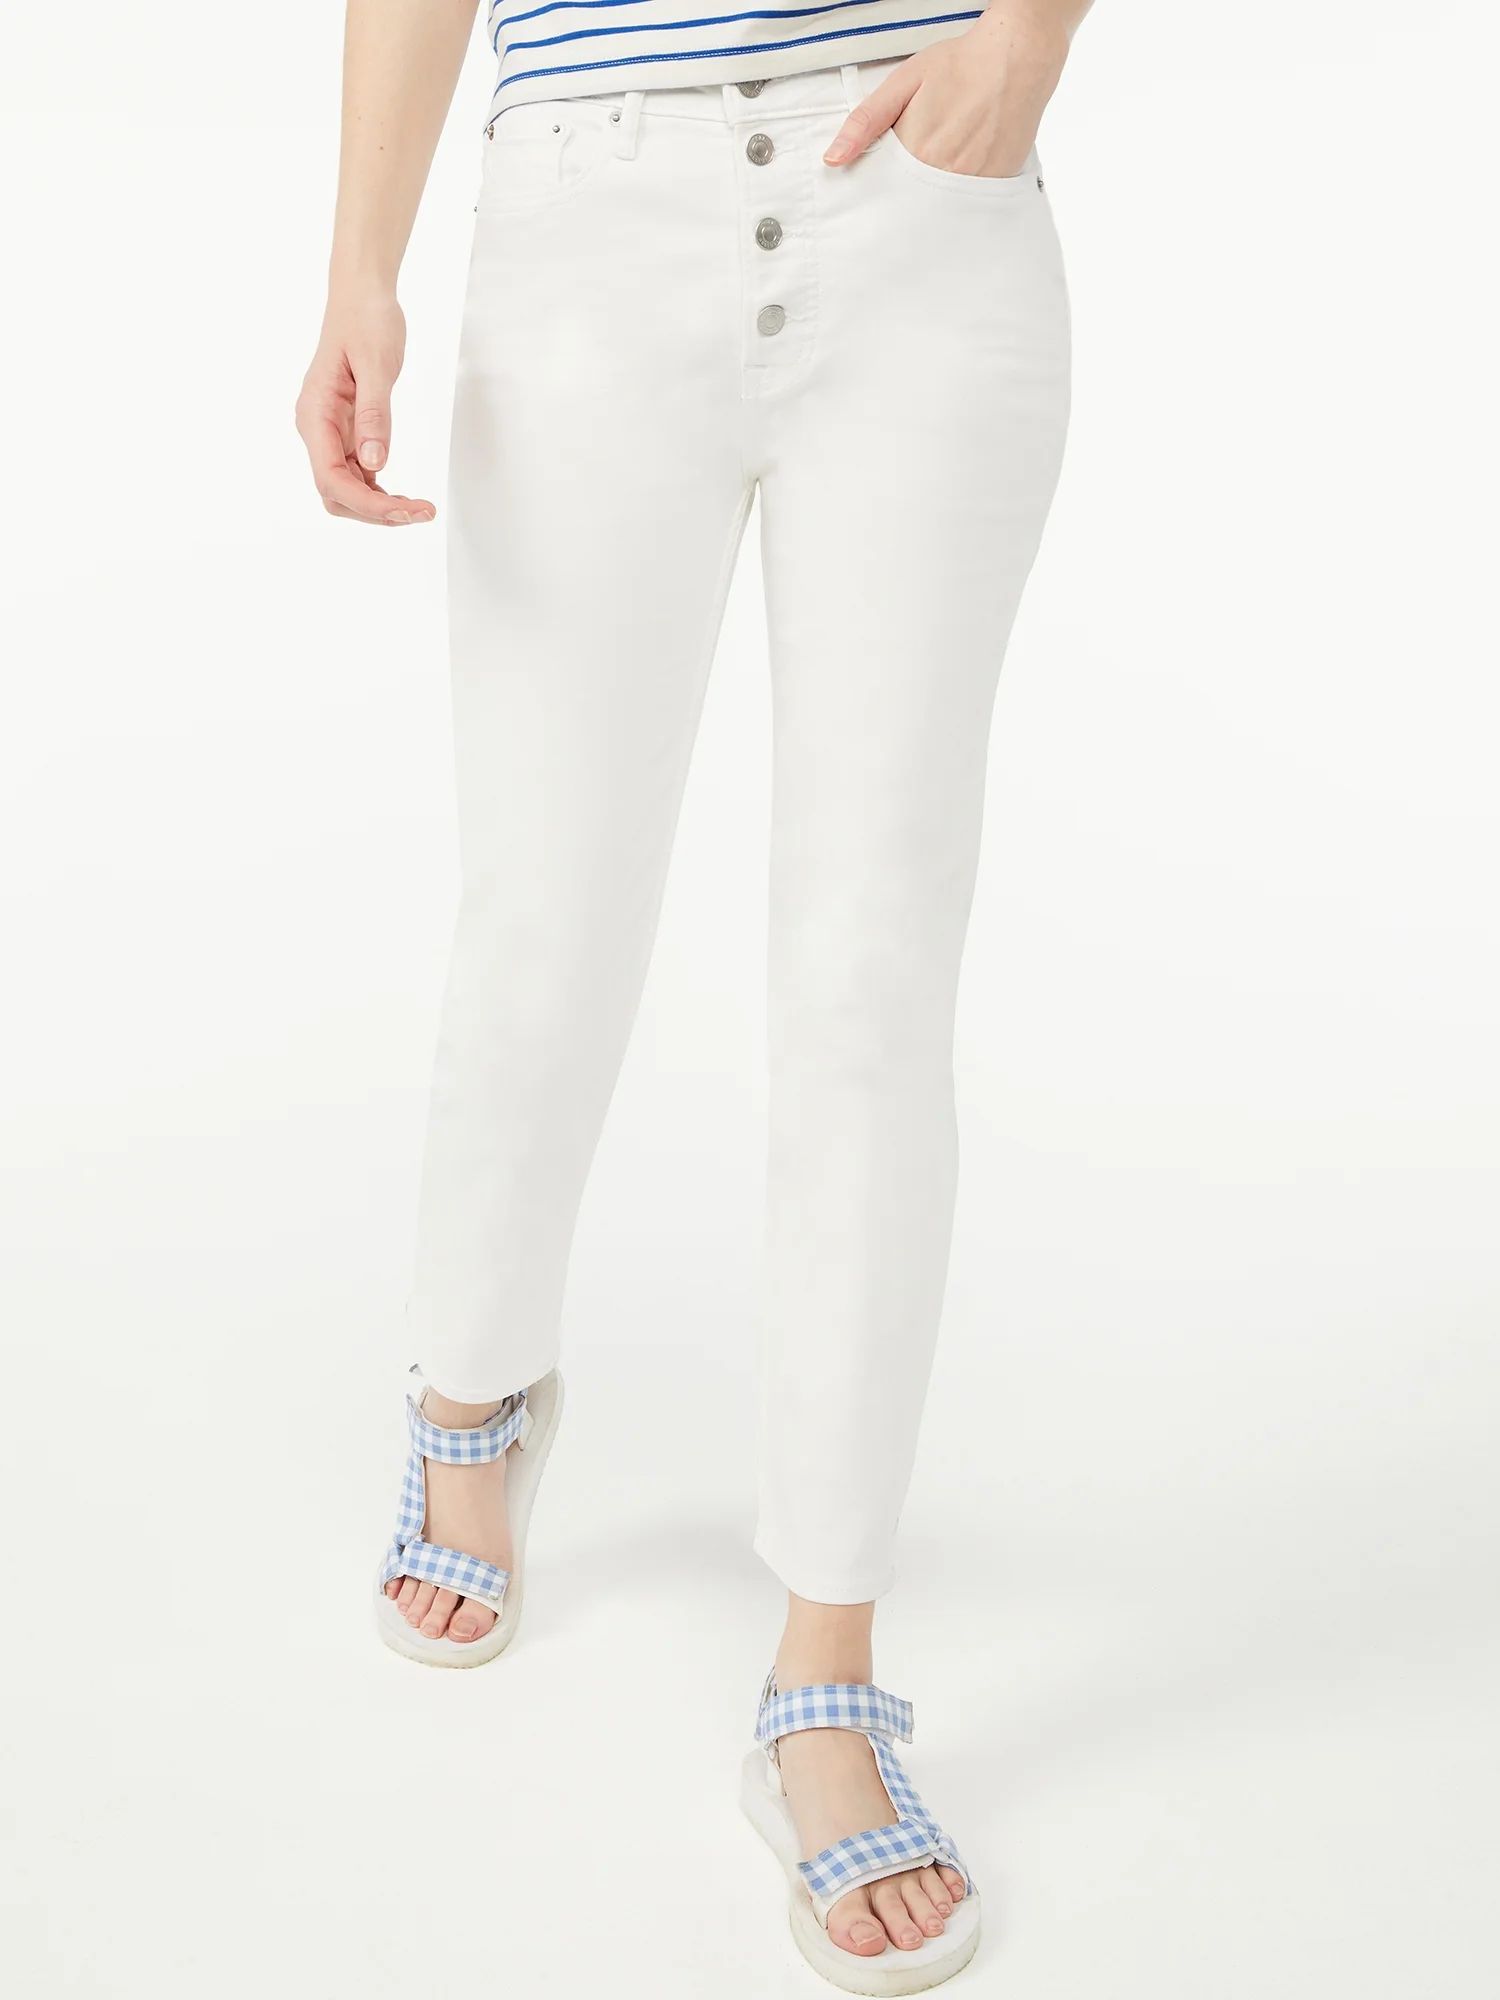 Free Assembly Women's Essential Slim Jeans with Exposed Button Front | Walmart (US)